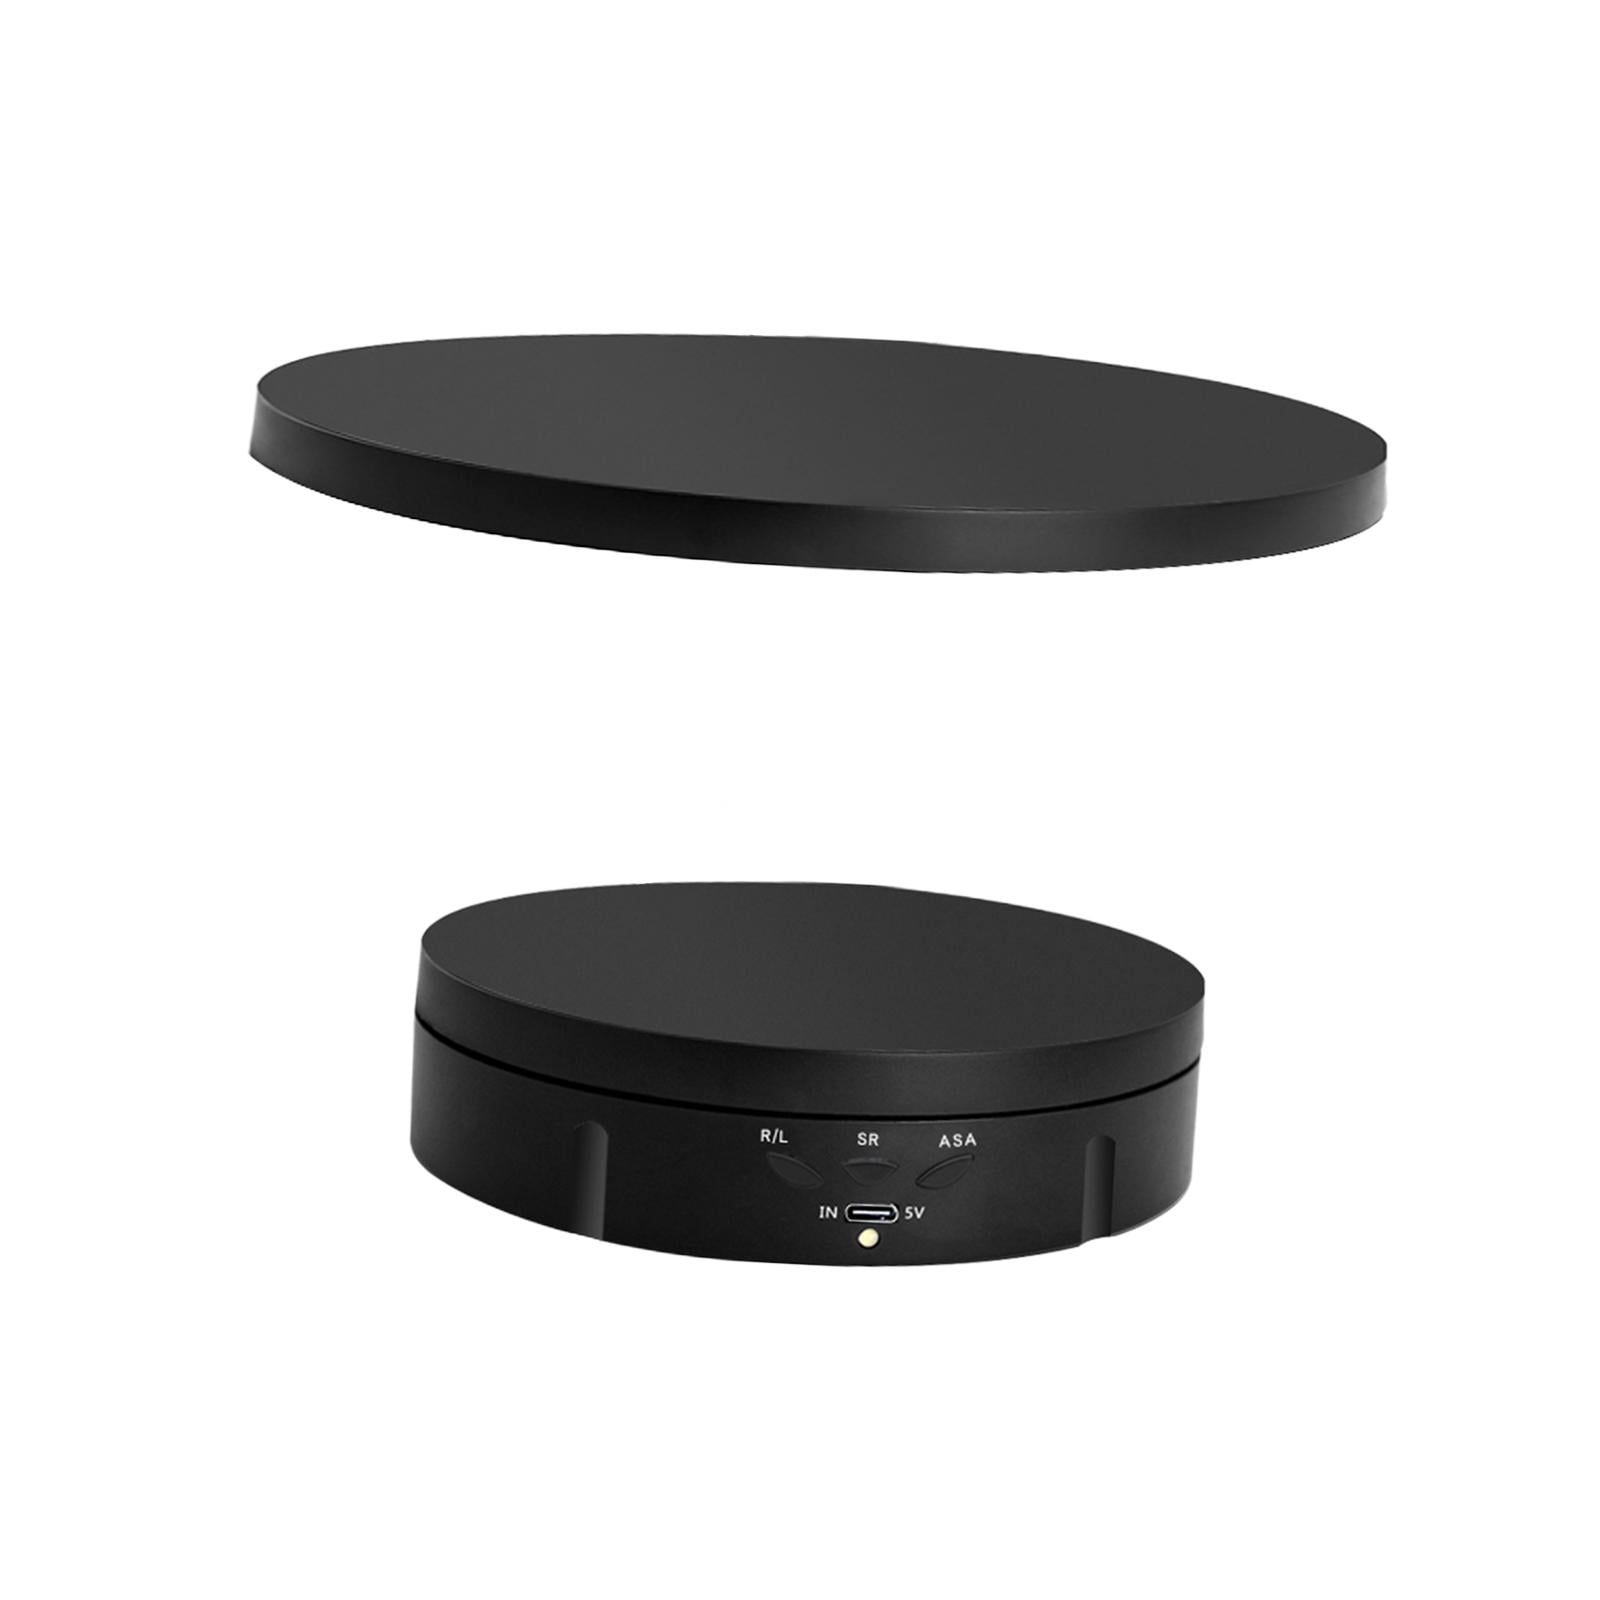 Rotating Display Stand 360 Degree Motorized Rotating Turntable